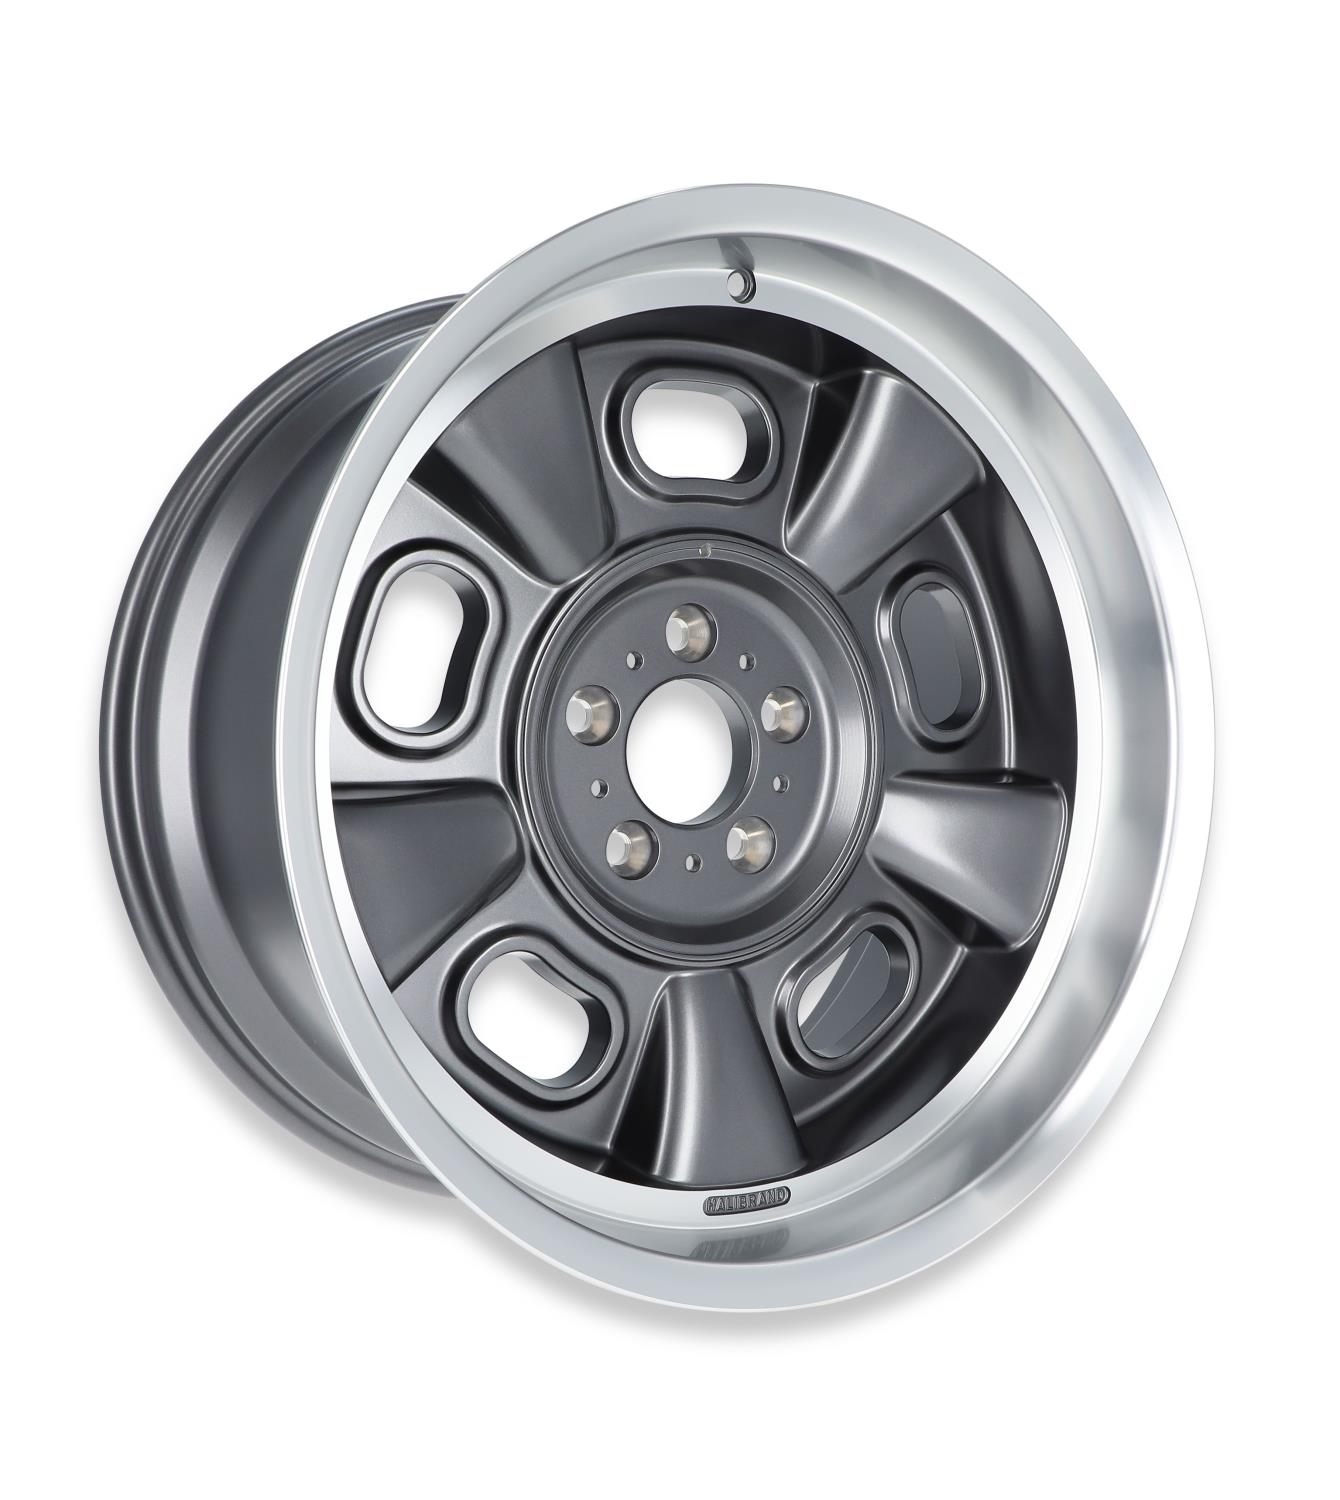 Indy Roadster Wheel, Size: 20x10", Bolt Pattern: 5x5", Backspace: 5.5" [Anthracite - Semi Gloss Clearcoat]